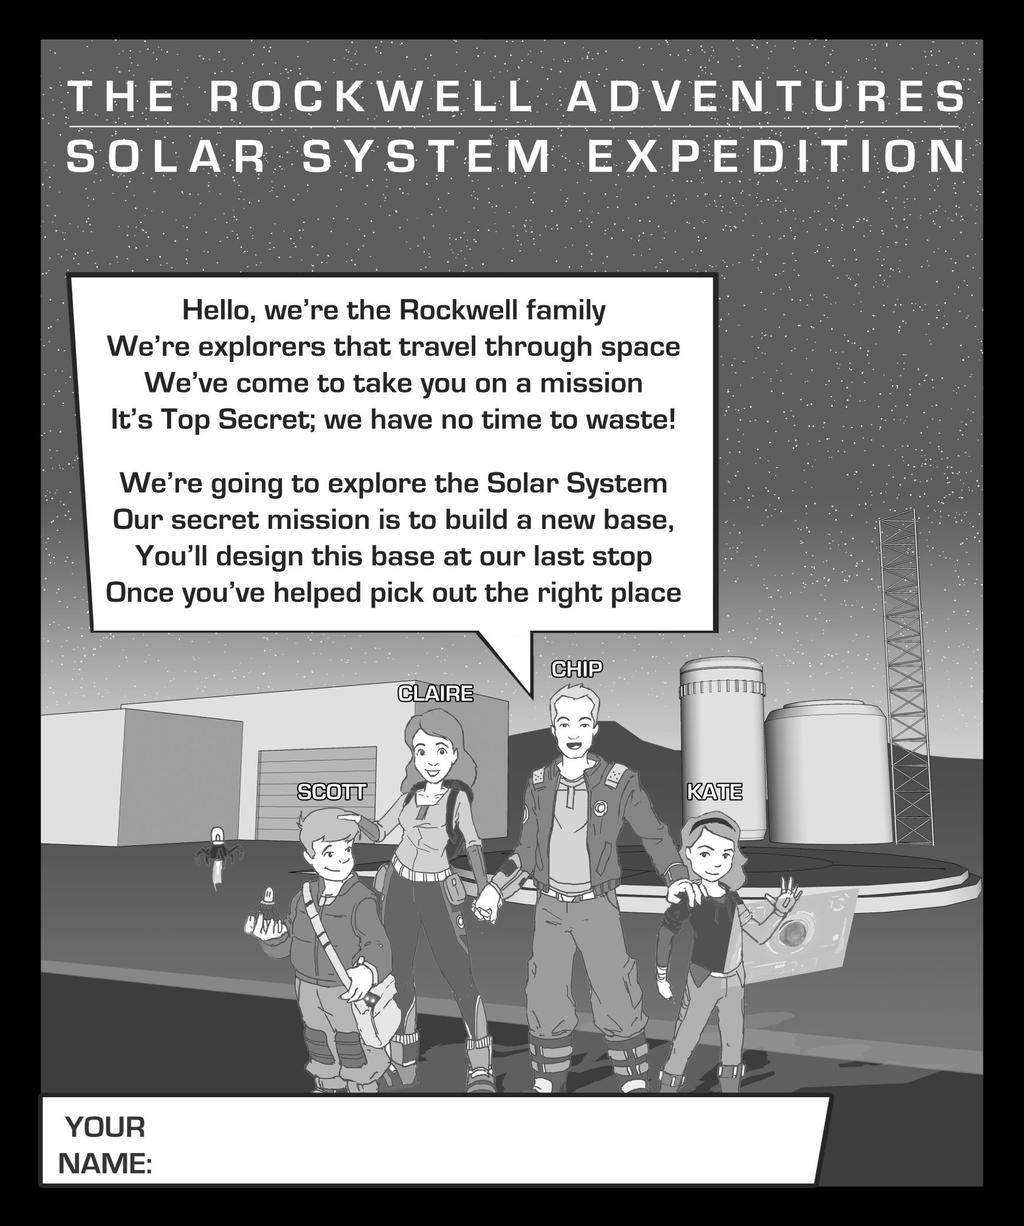 Hello, we re the Rockwell family. We re here to take you on an exciting Top Secret mission to explore the planets in our Solar System.